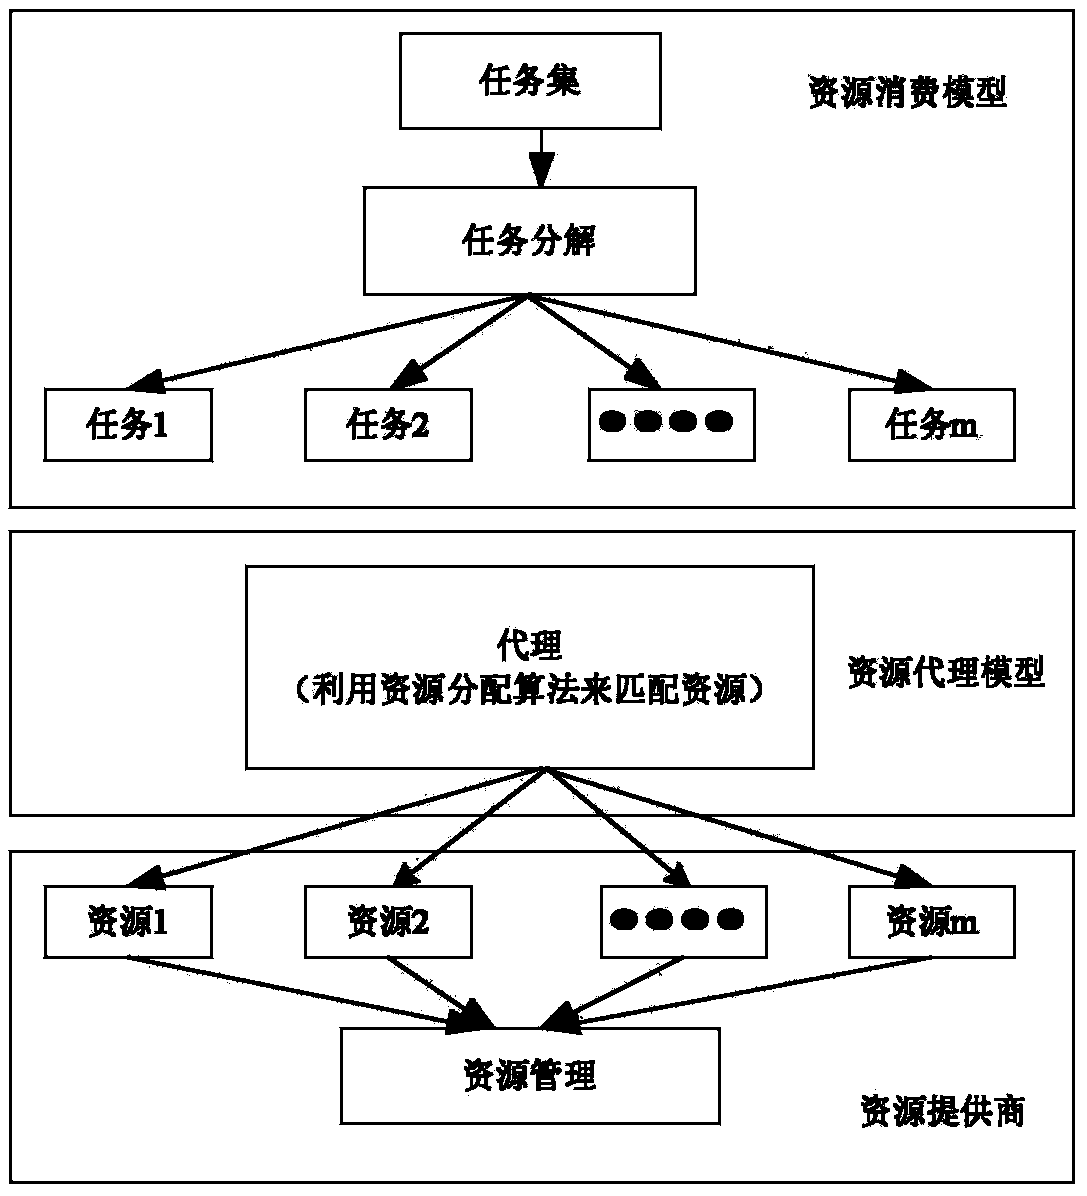 Resource scheduling method in forwarding and control separation network based on economic model